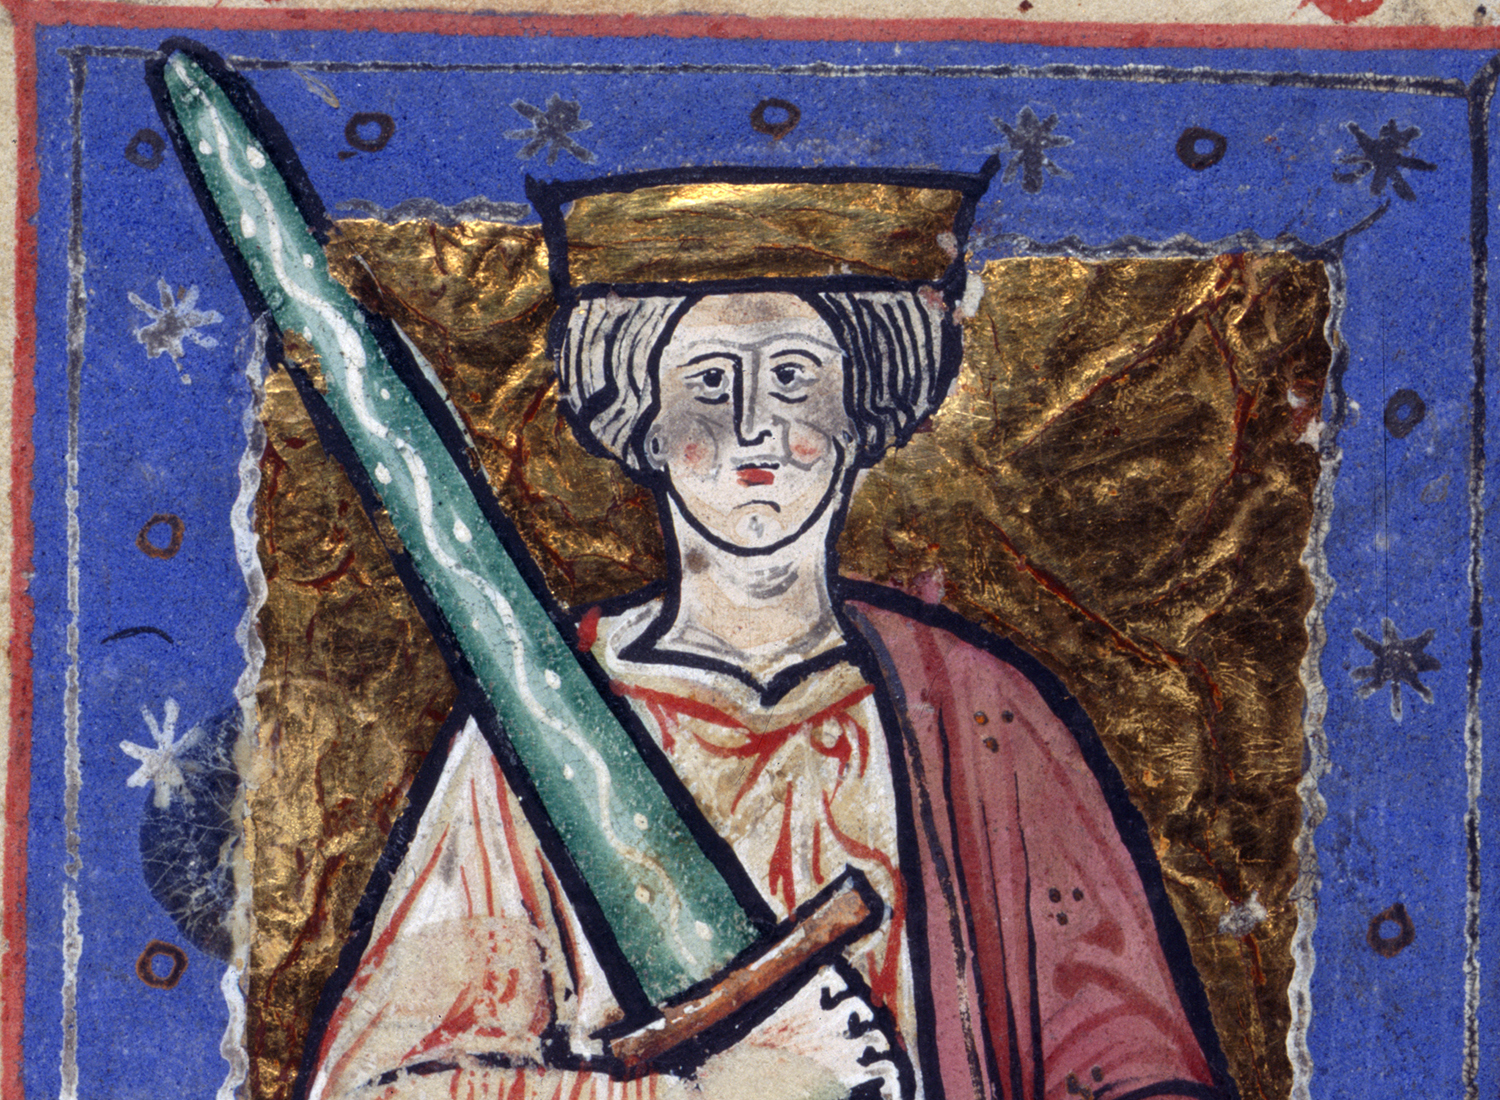 Portrait of Æthelred from the Abingdon Chronicle, c.1220.